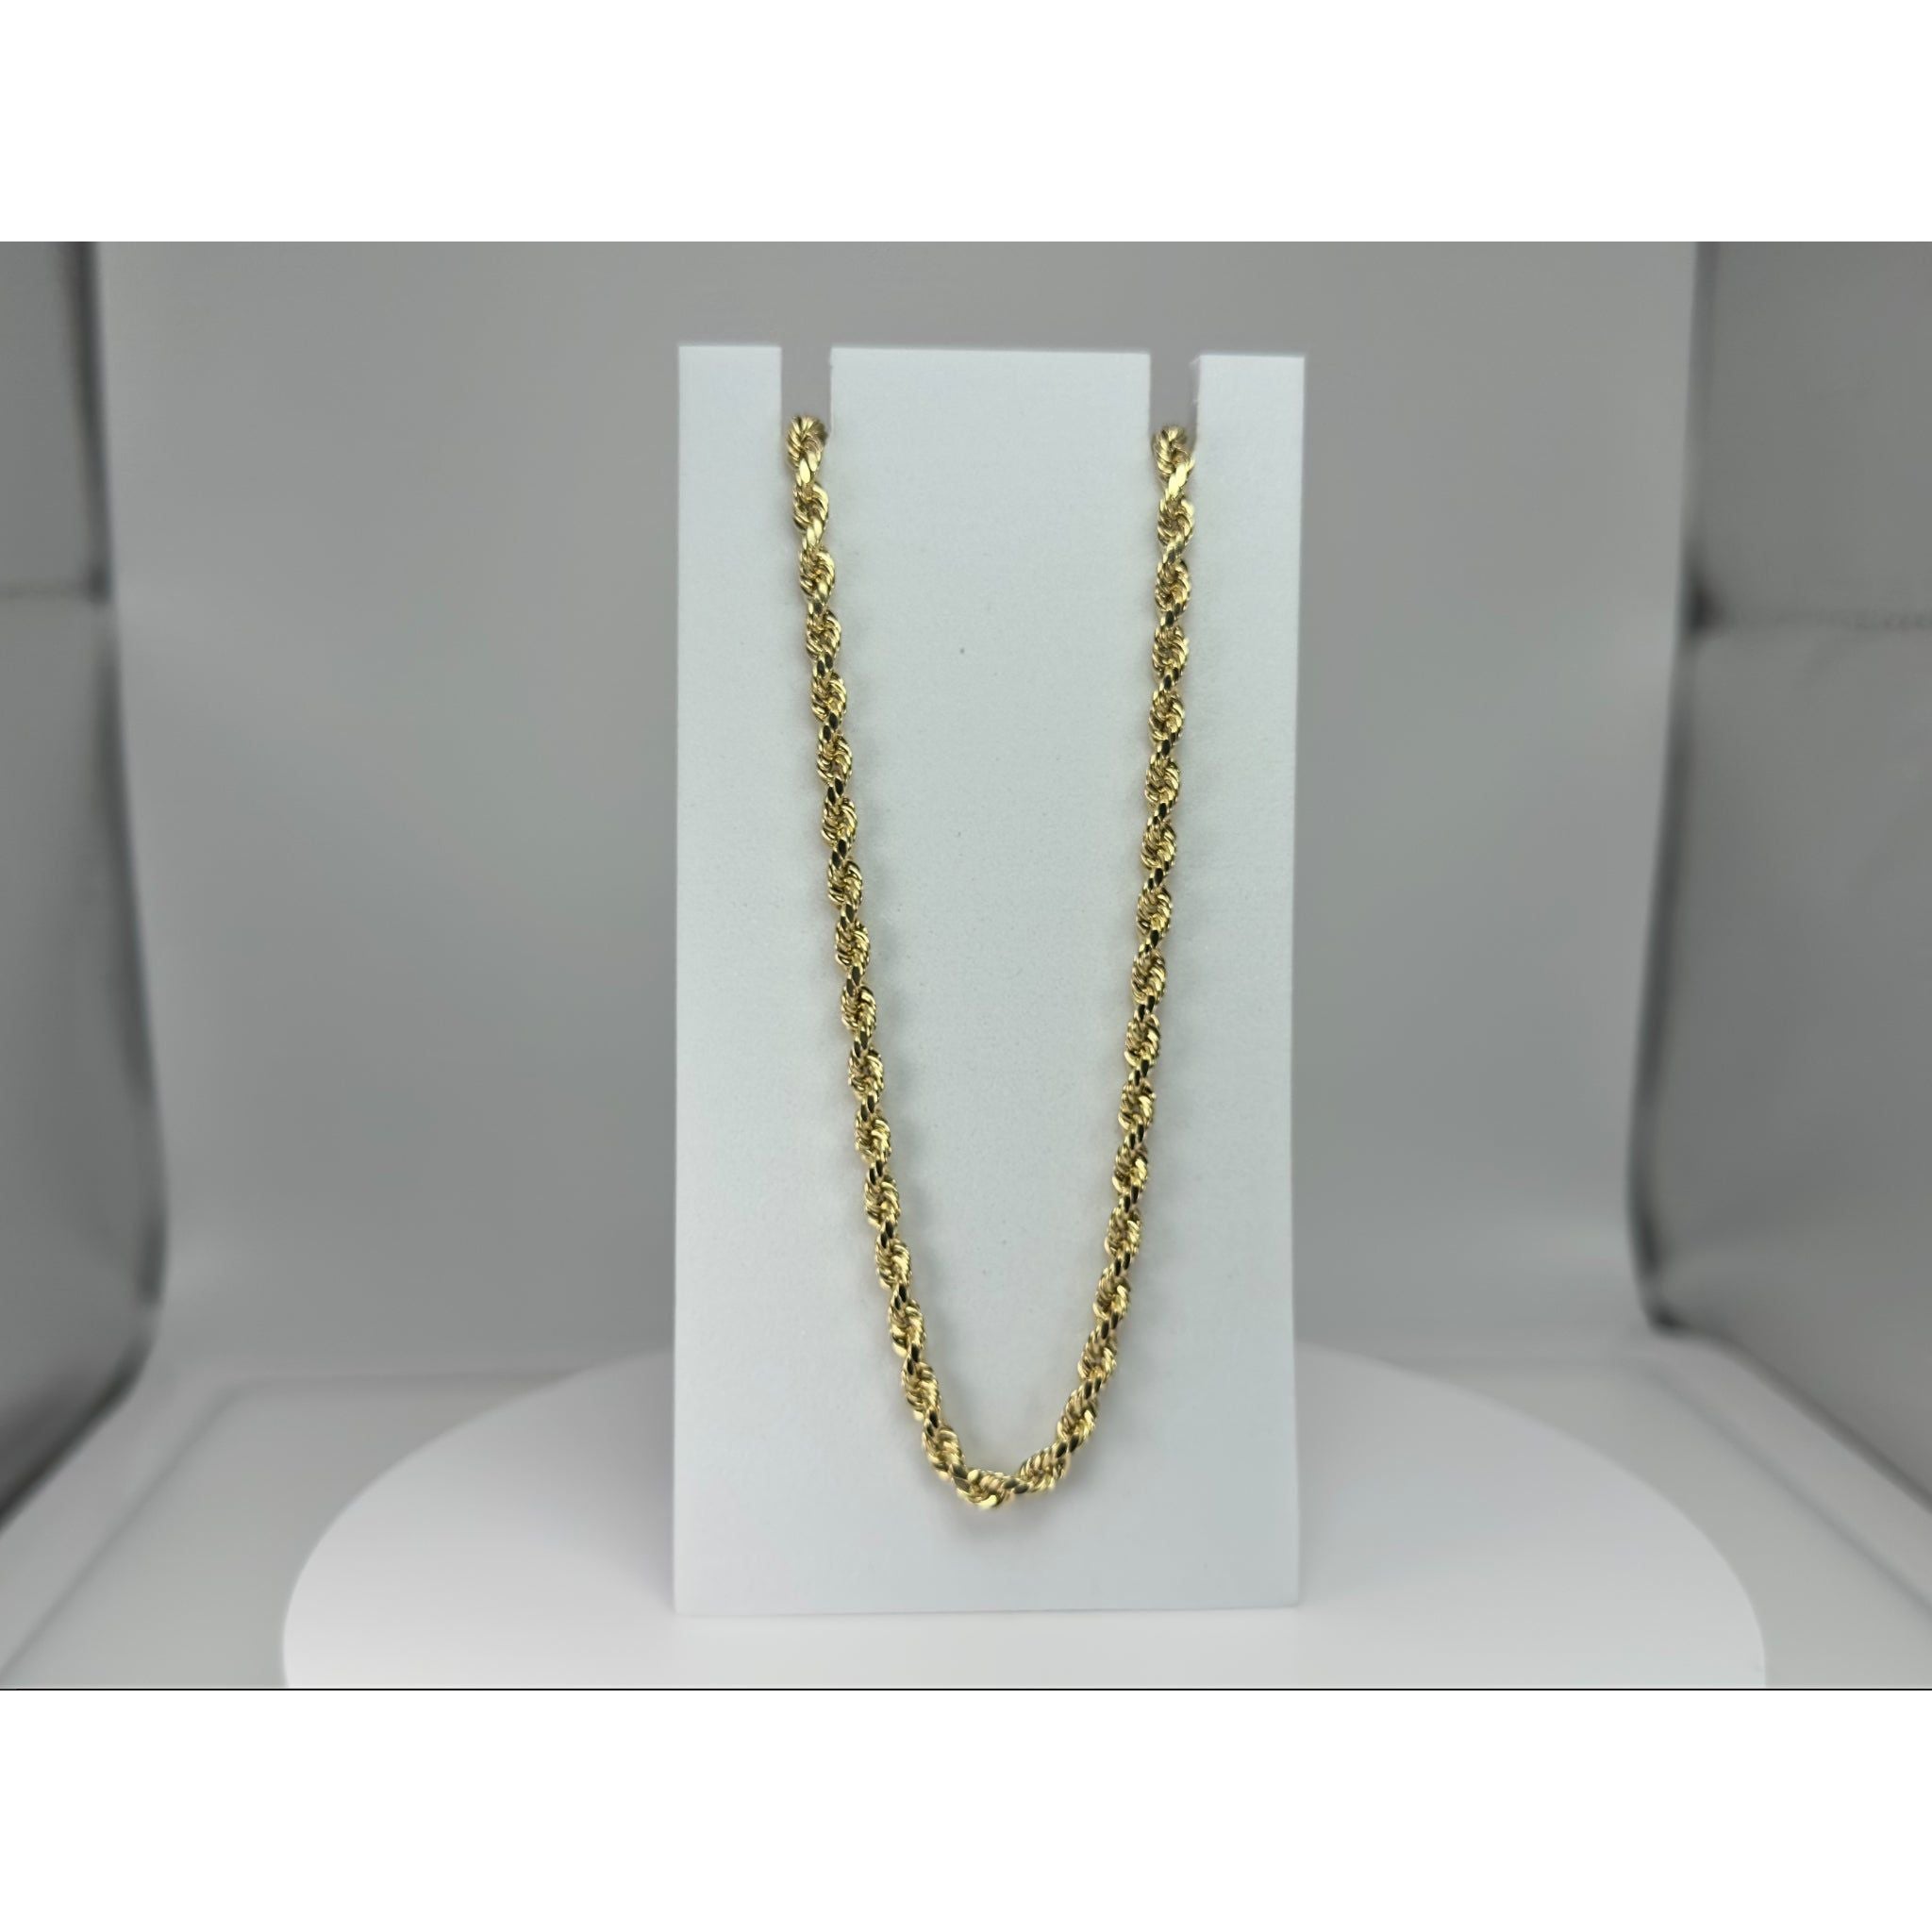 DR1732 - 14K Yellow Gold - Men's Gold Chains